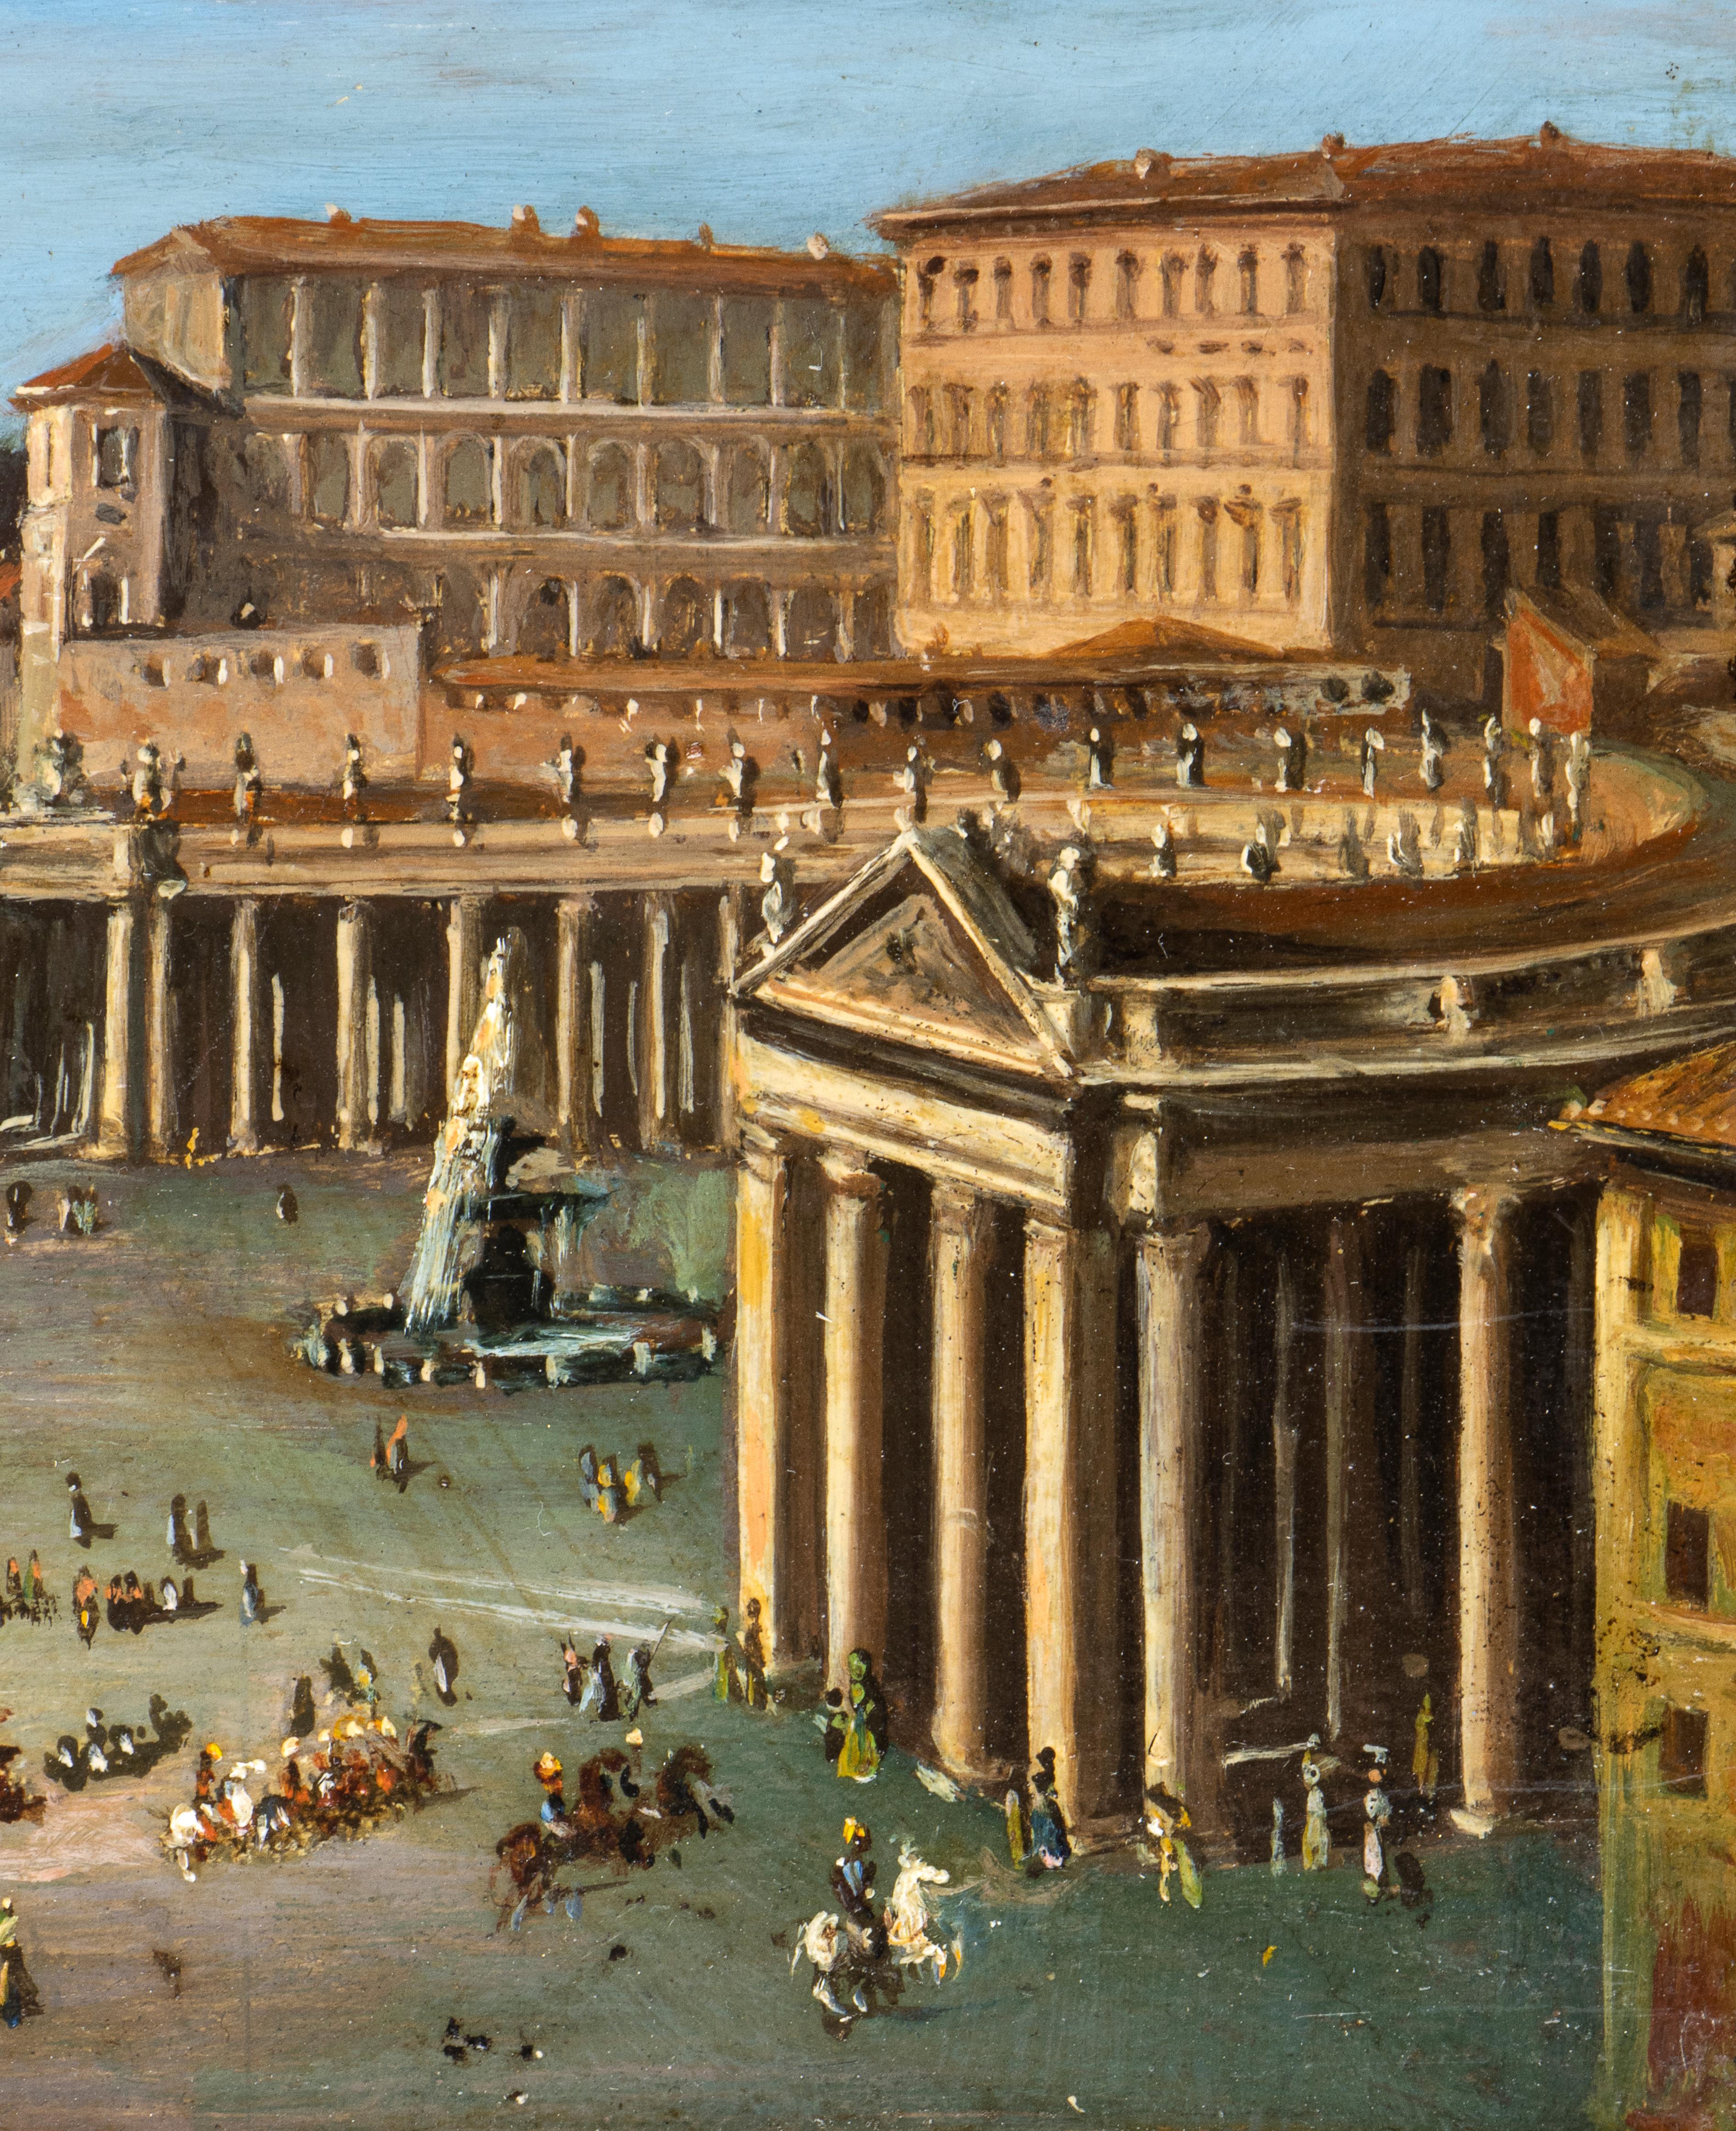 Oil Paint View Of St. Peter's Basilica With The Square and Colonnade and Obelisk - Other Art Style Painting by Unknown